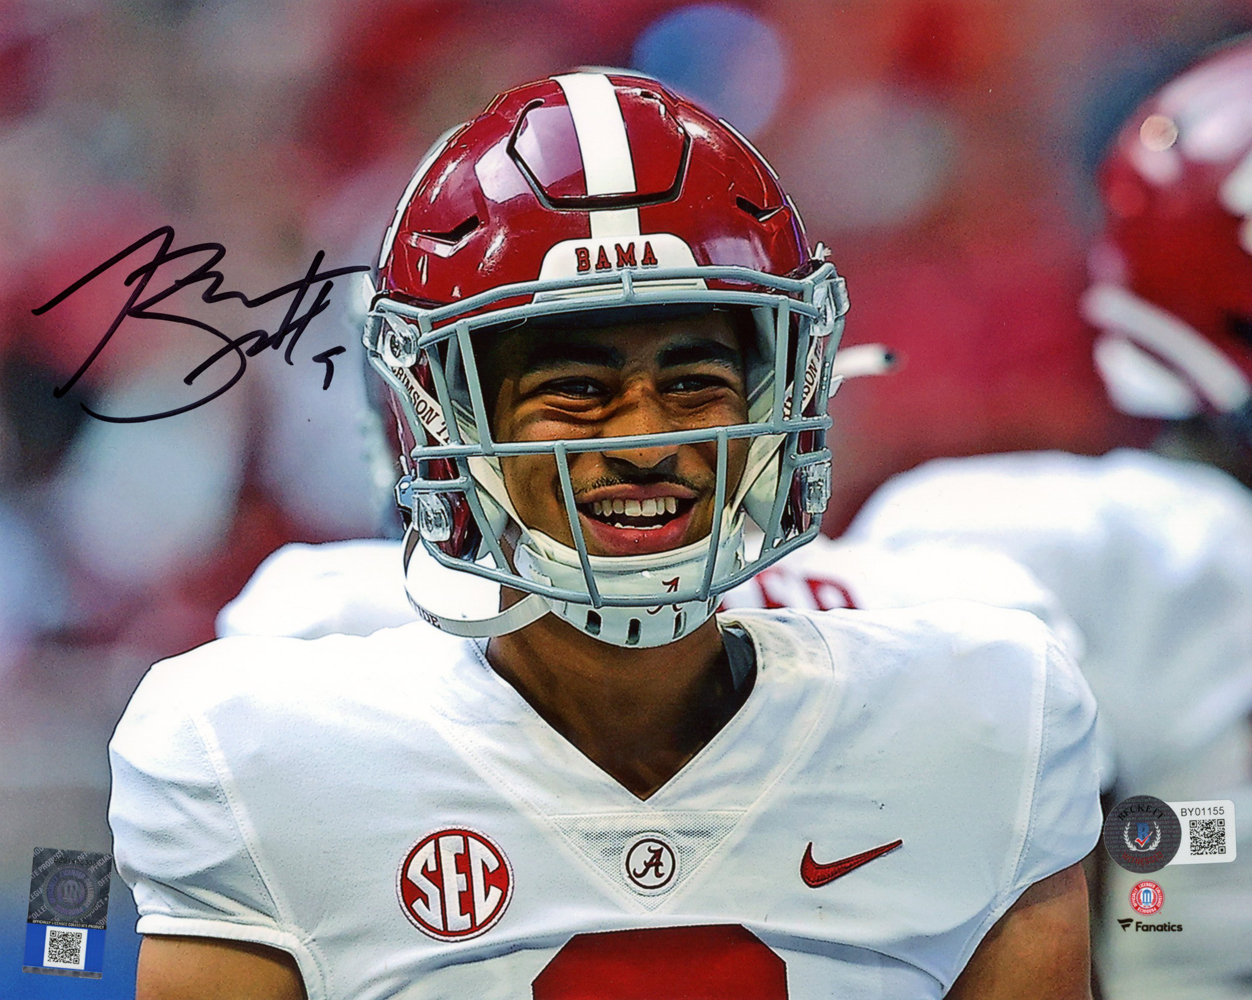 Bryce Young Autographed/Signed Alabama Crimson Tide 8x10 Photo BAS